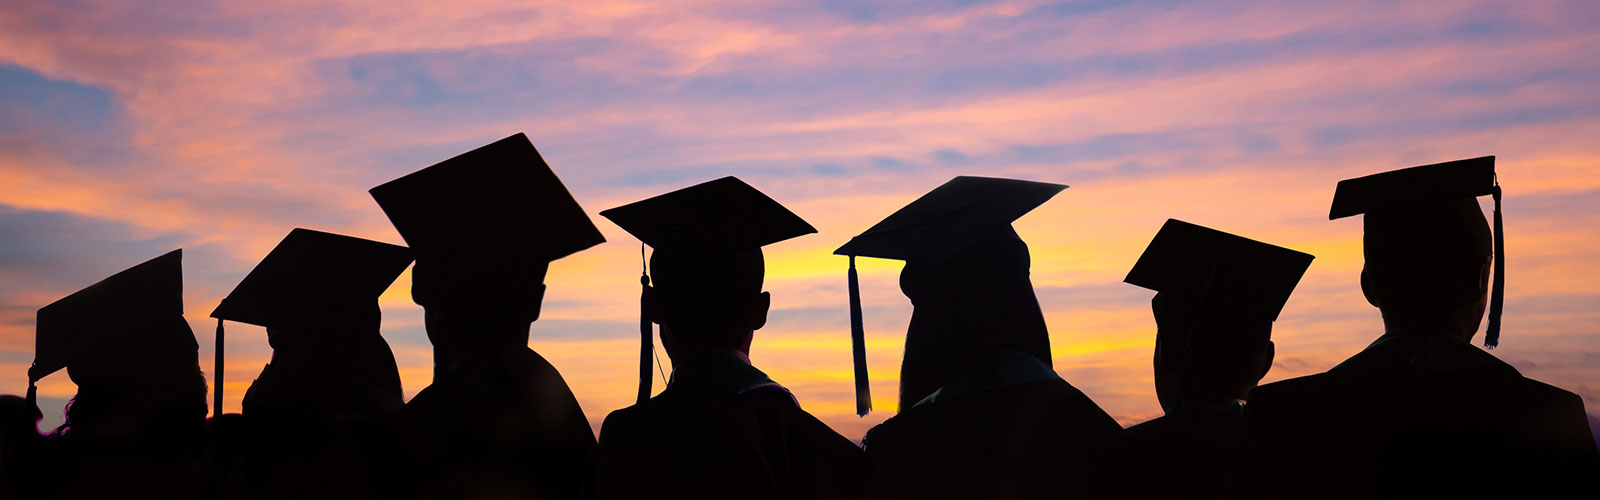 silhouette of students with graduation caps against an orange sunset